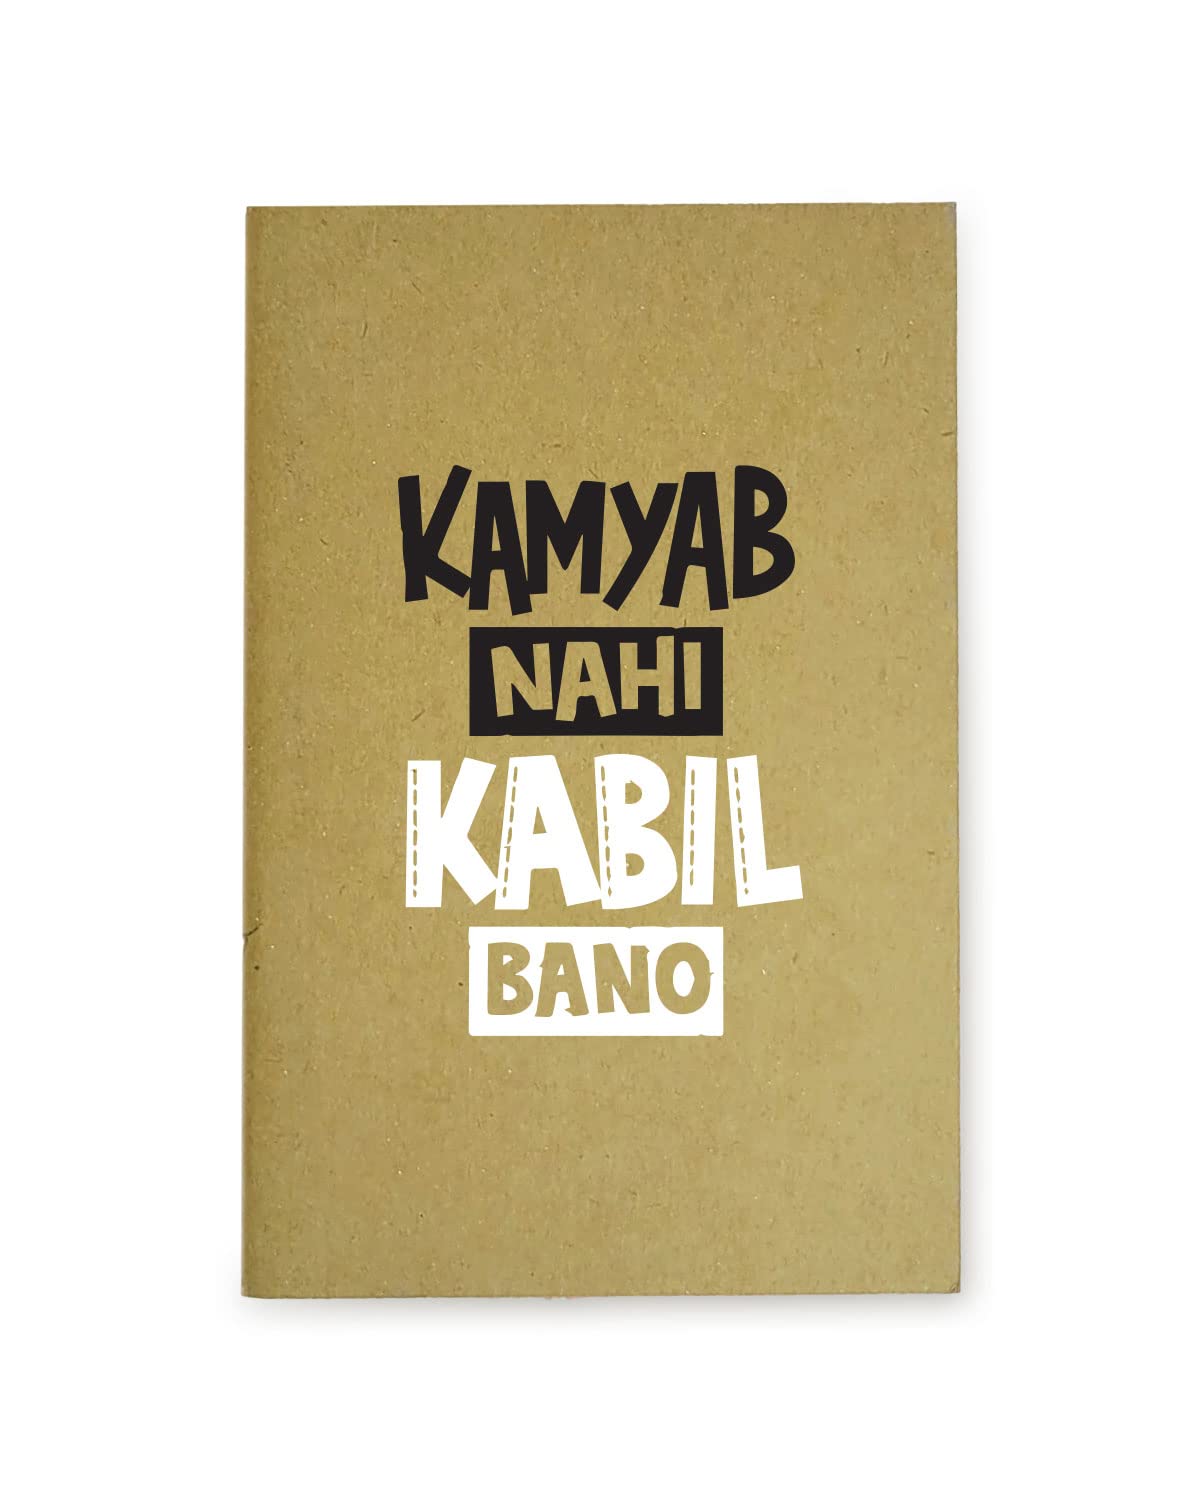 Kamyab Nahi Kabil bano - Brown A5 Doodle Notebook - Kraft Cover Notebook - A5 - 300 GSM Kraft Cover - Handmade - Unruled - 80 Pages - Natural Shade Pages 120 GSM- Funny Quotes & Quirky, Funky designs